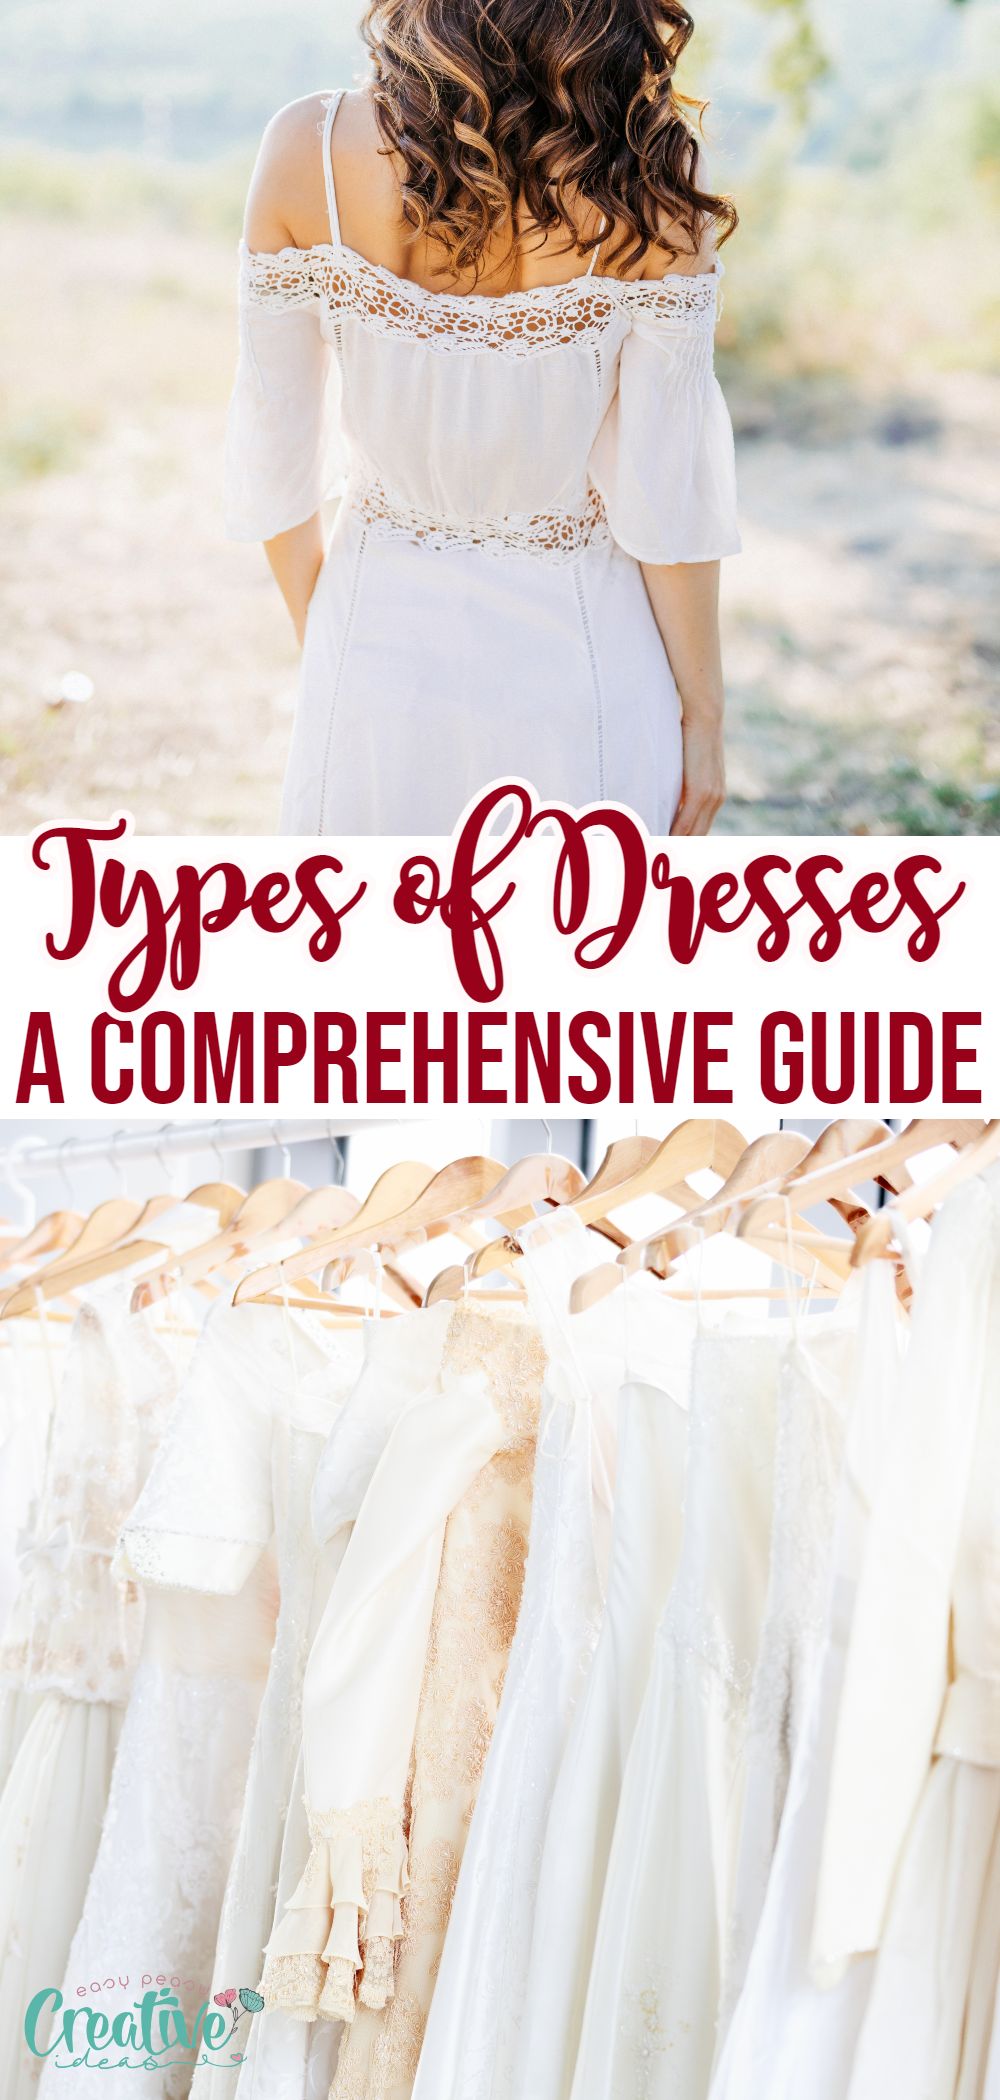 Ever wondered what the difference between a cocktail dress and an evening gown is? Or how about a maxi dress vs. a midi dress? I've got you covered with this comprehensive guide to various types of dresses. via @petroneagu